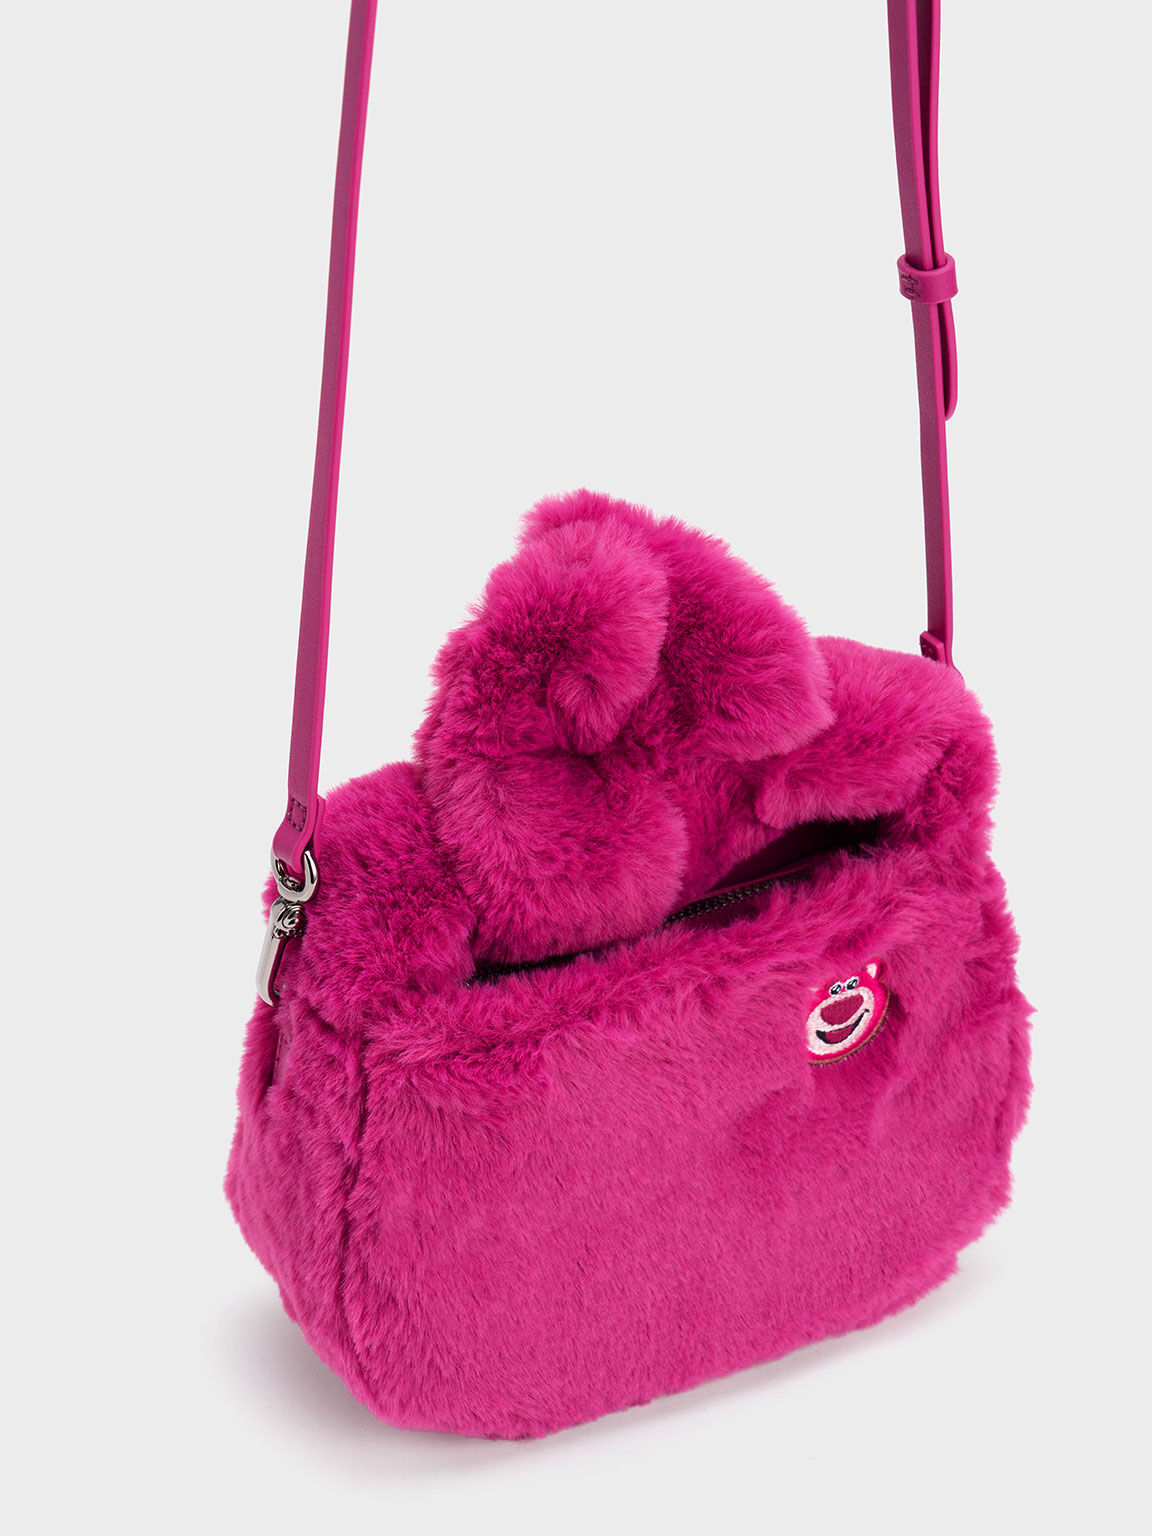 Lotso Furry Knotted Bag, Purple, hi-res